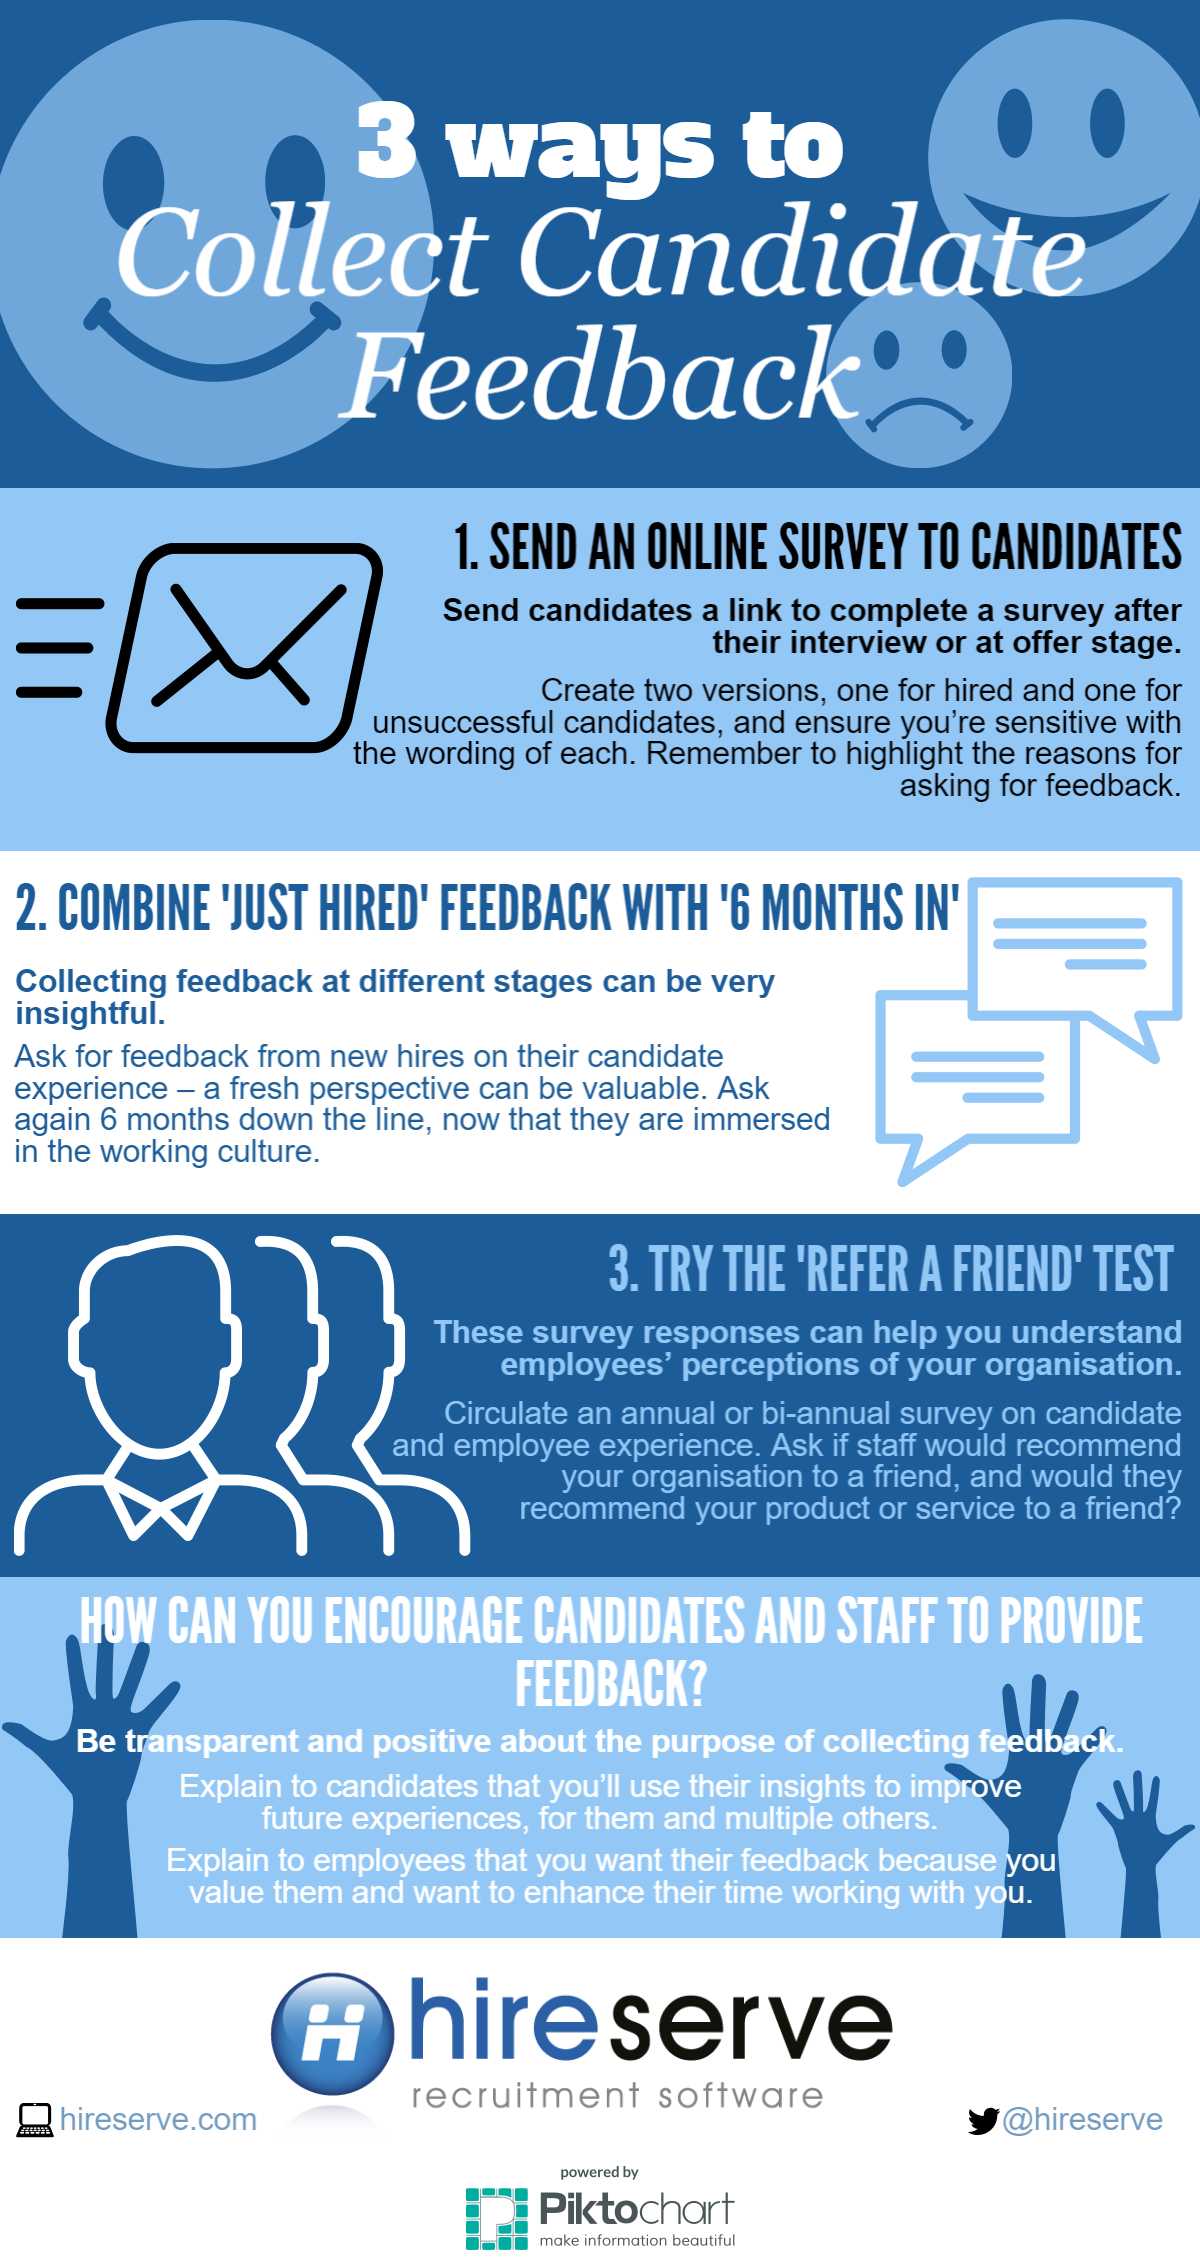 3 ways to collect candidate feedback infographic